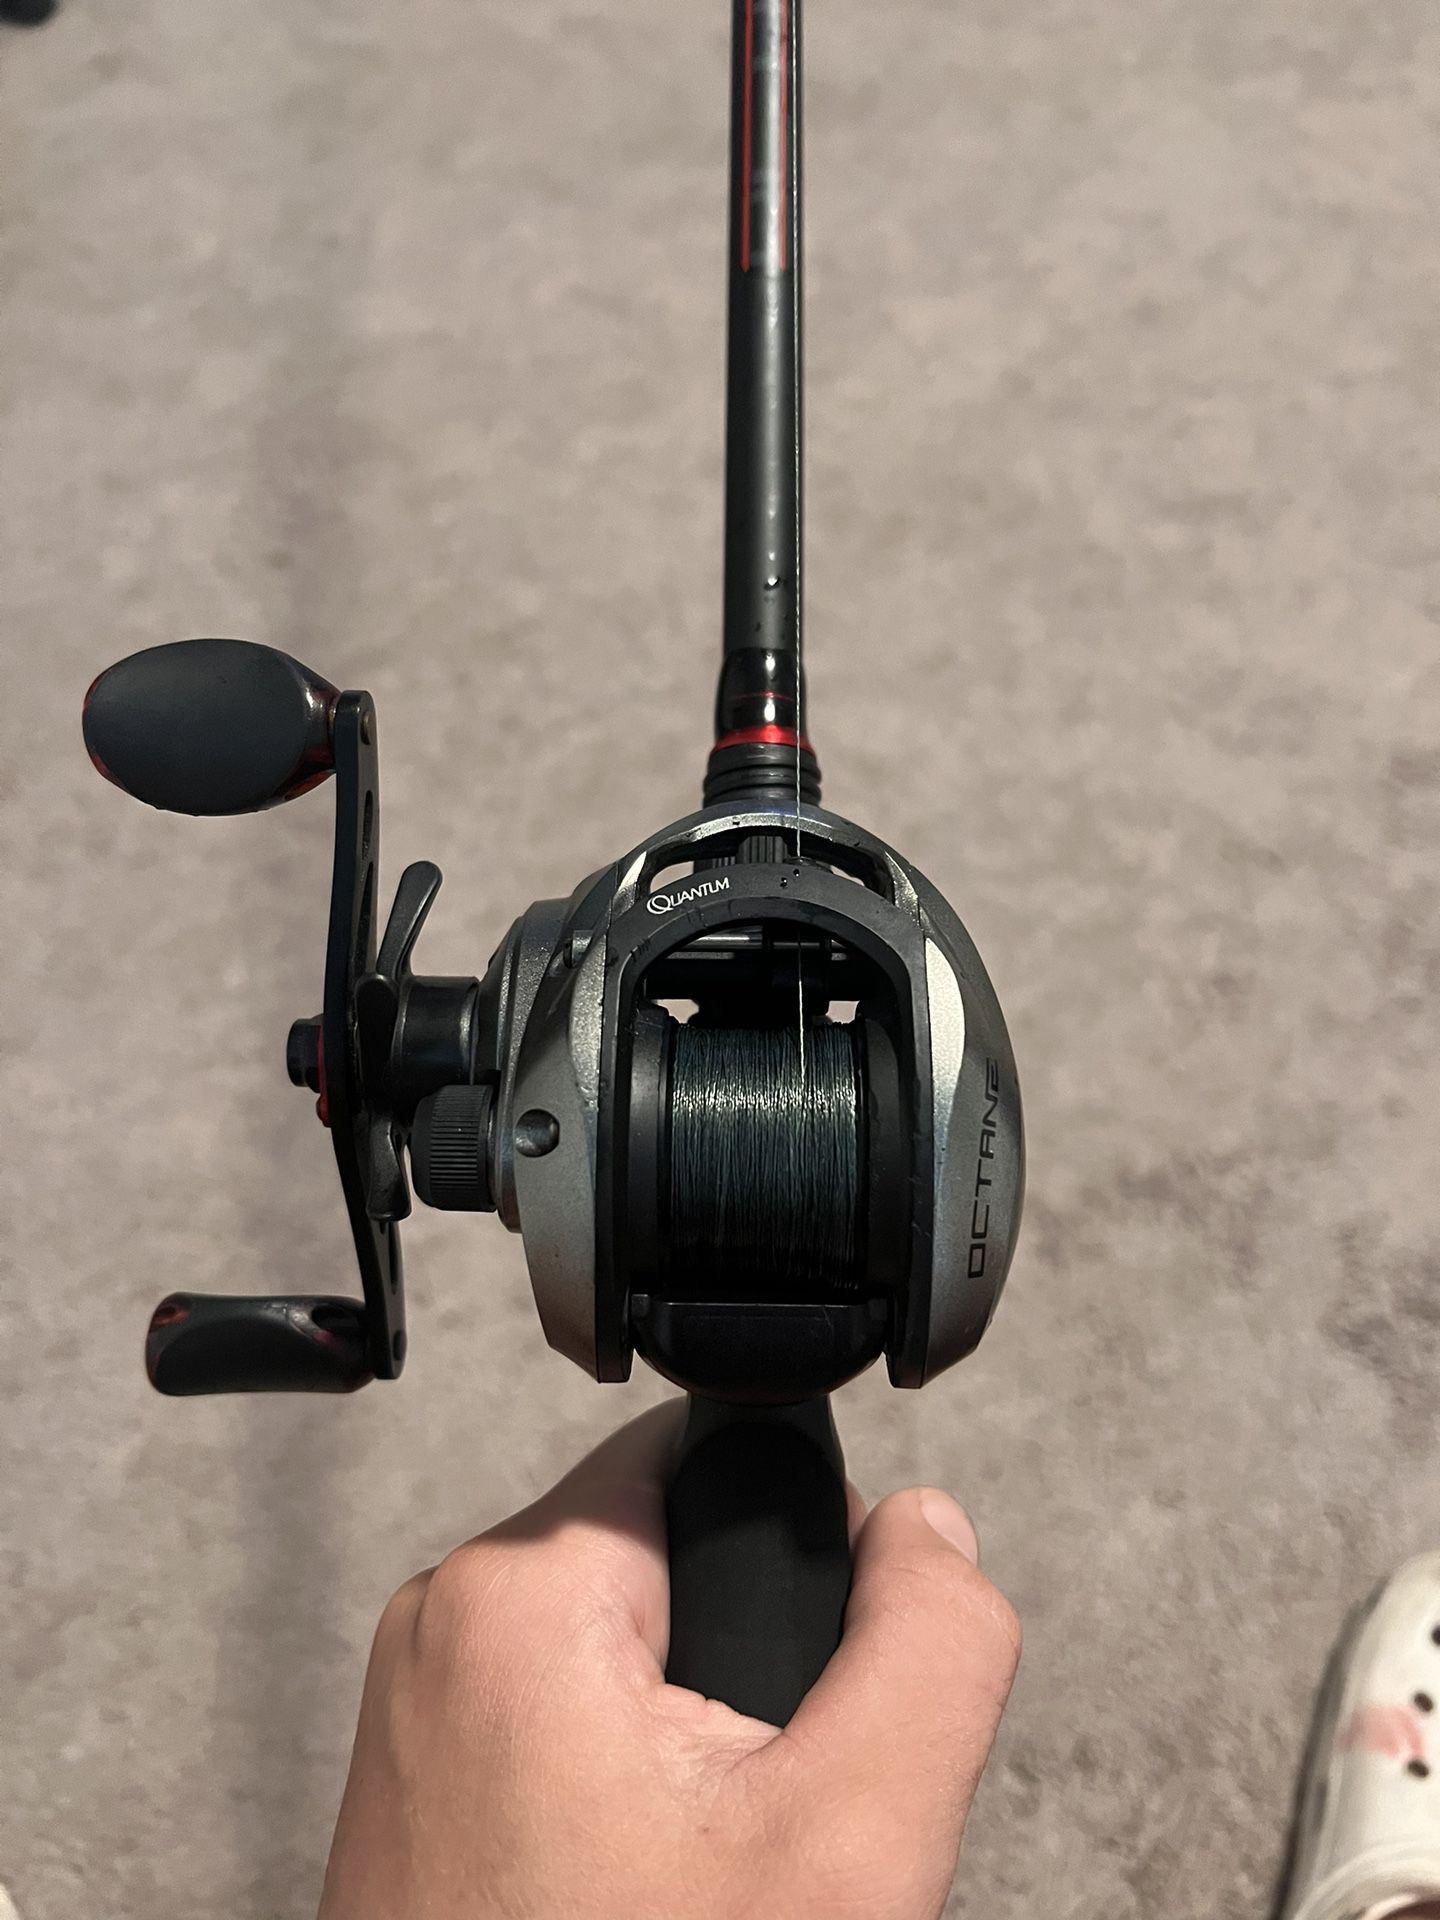 13 fishing baitcasting combo for Sale in Lake Worth, FL - OfferUp